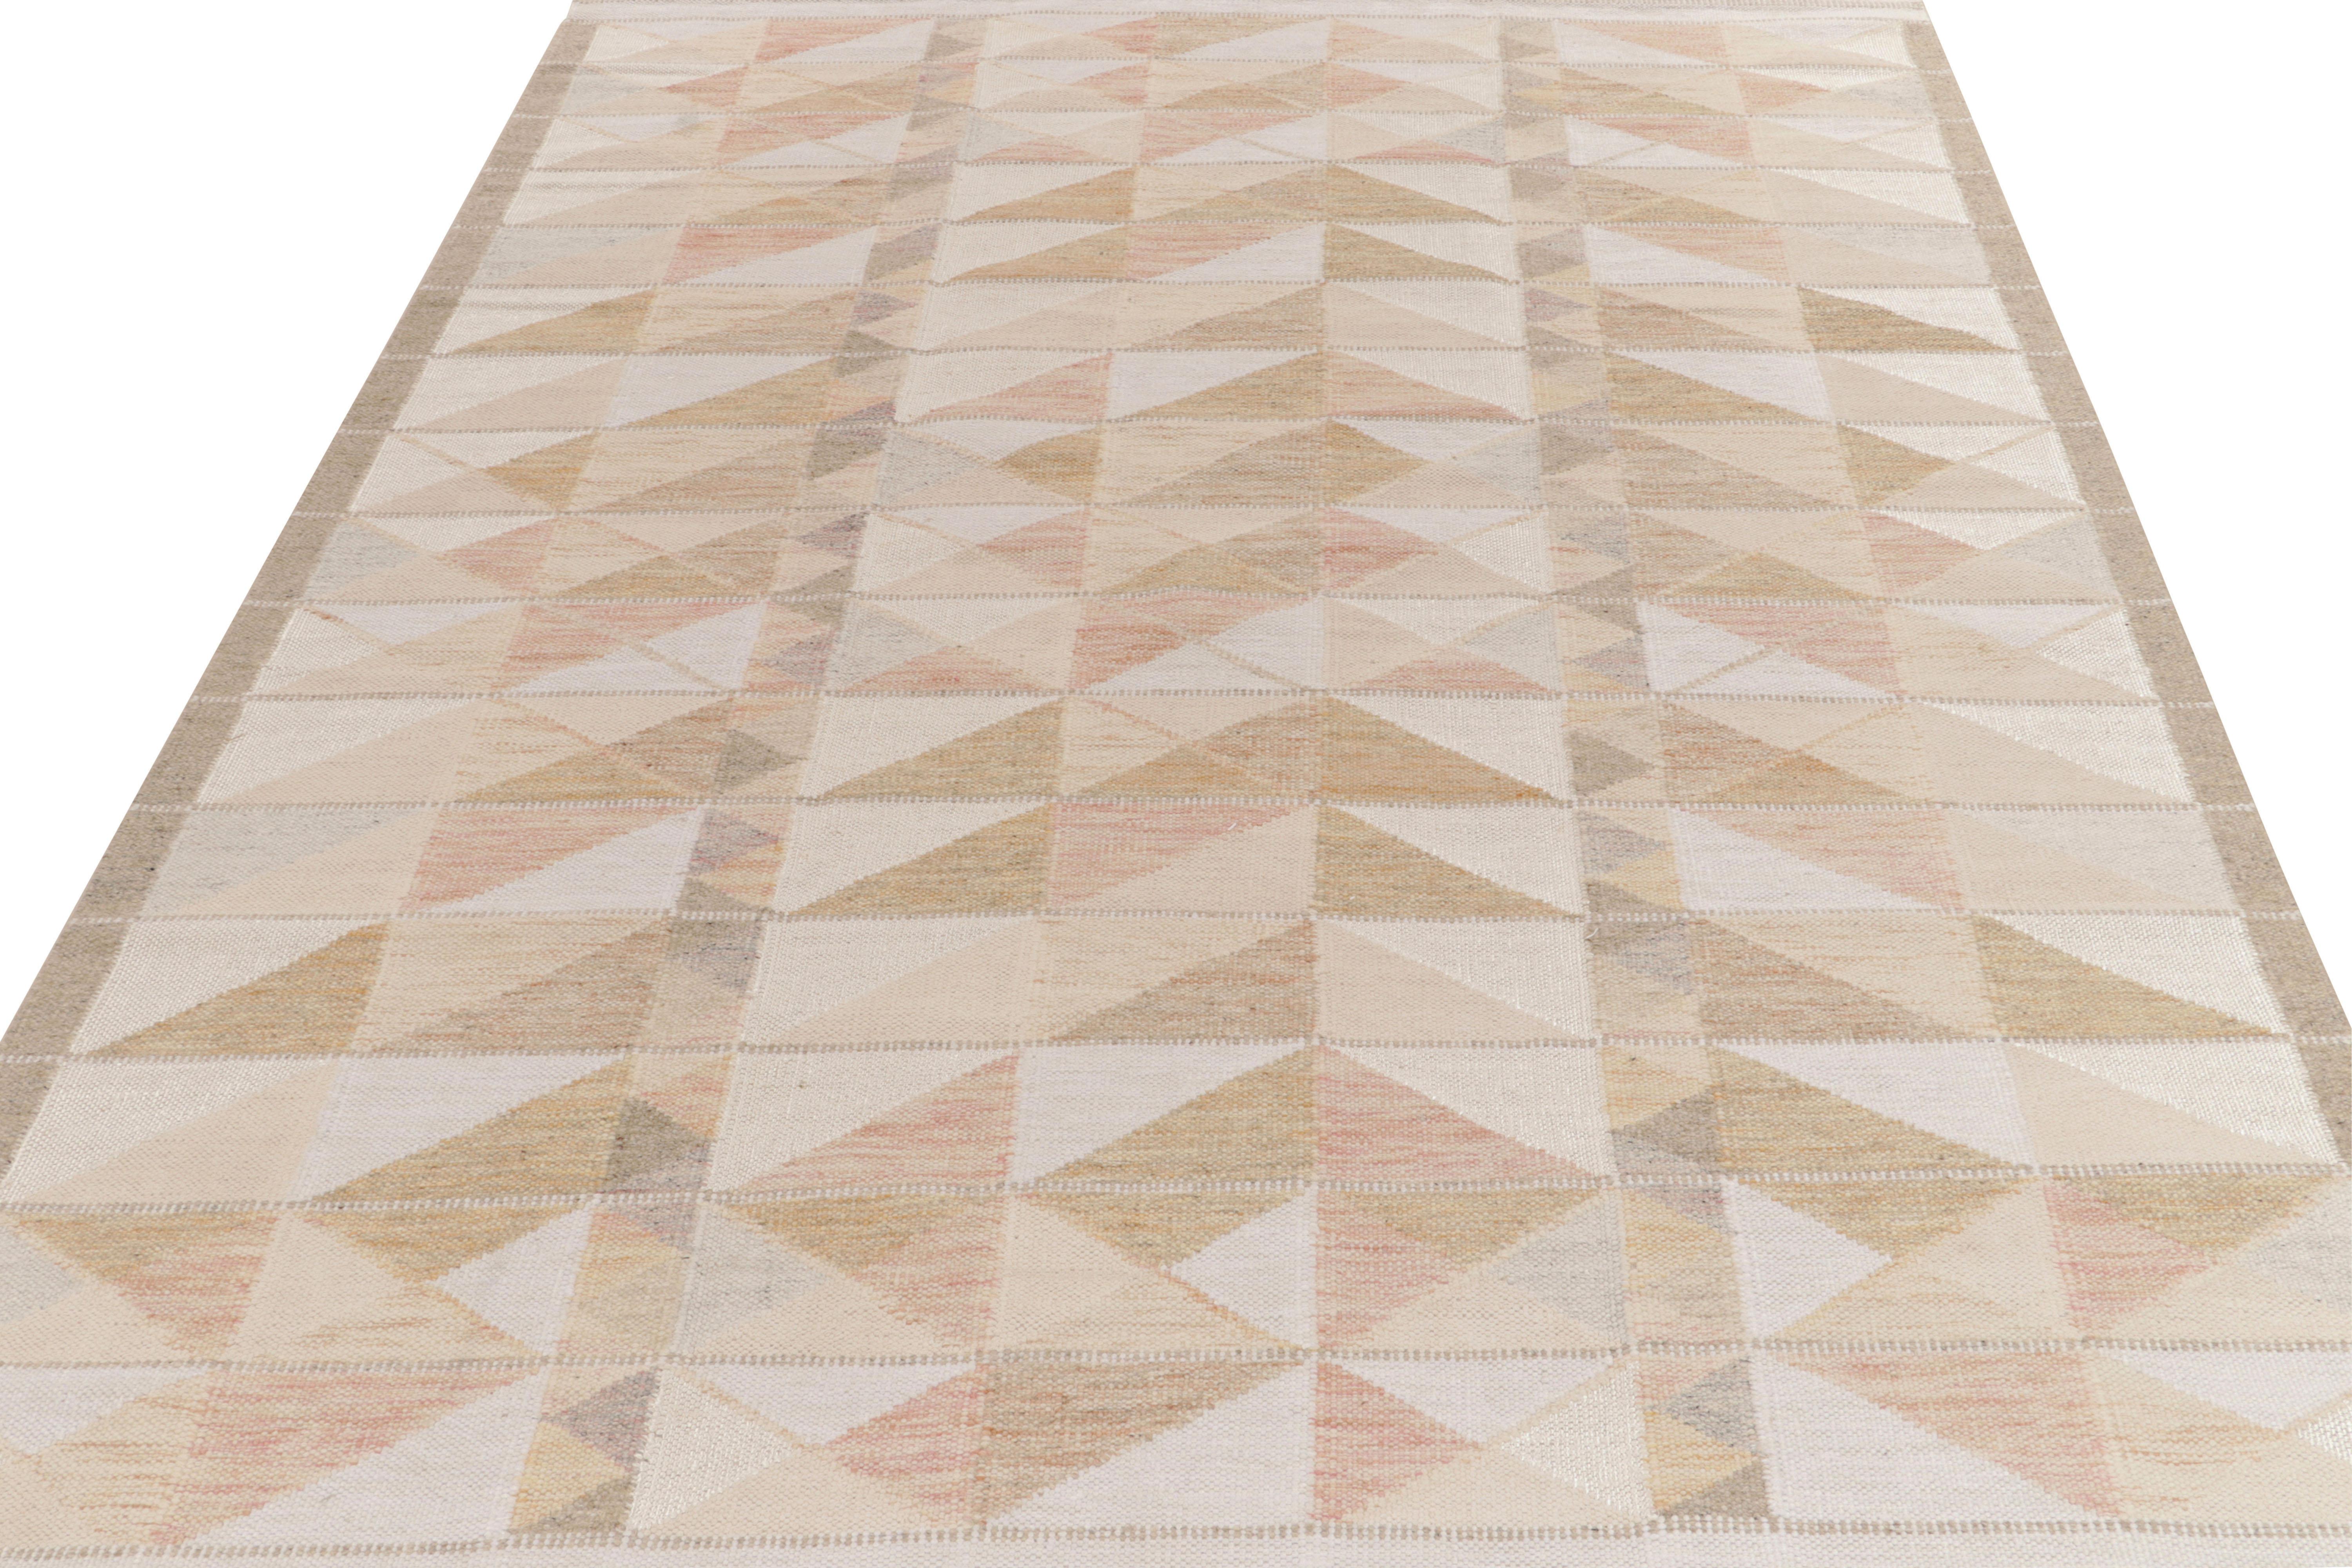 Rug & Kilim’s Scandinavian style kilim, from our celebrated flat weave texture of the titular award-winning collection. This 9x12 rug enjoys the finesse of Swedish aesthetics with a dextrous geometric pattern casting an almost 3D impression. Subdued